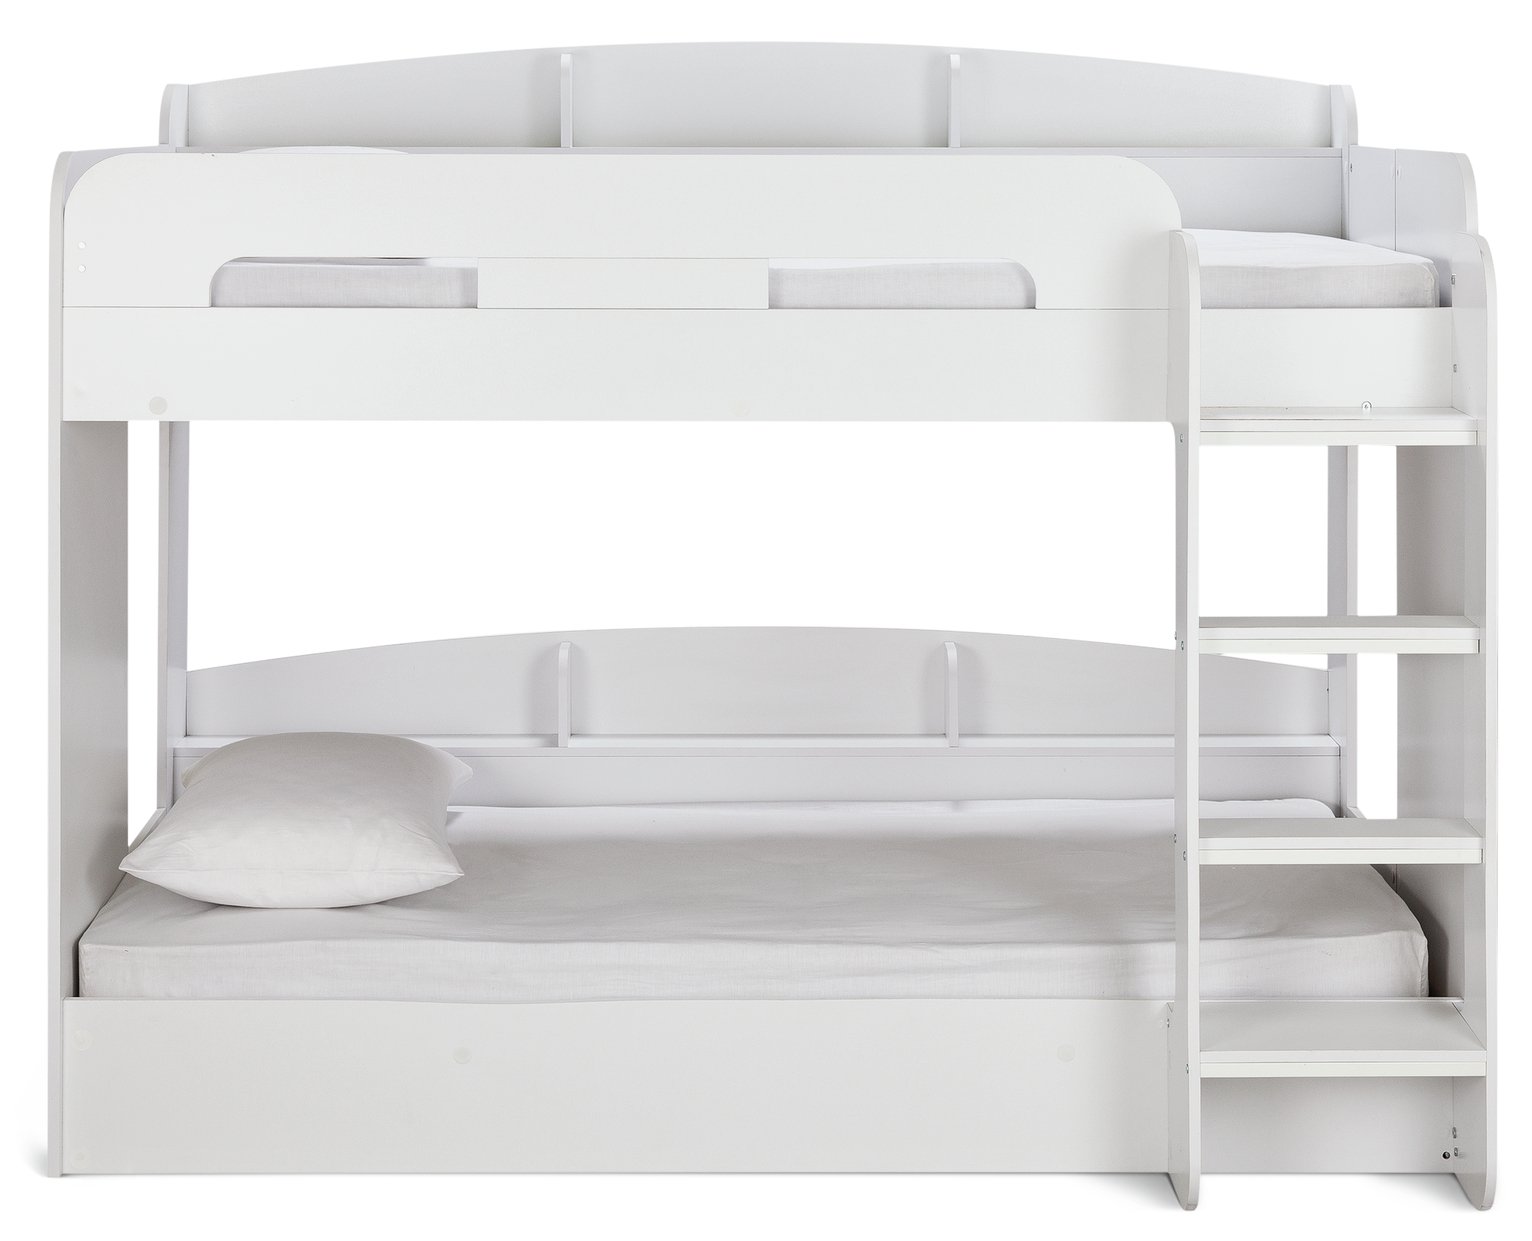 Argos Home Ultimate Bunk Bed and 2 Kids Mattresses Review